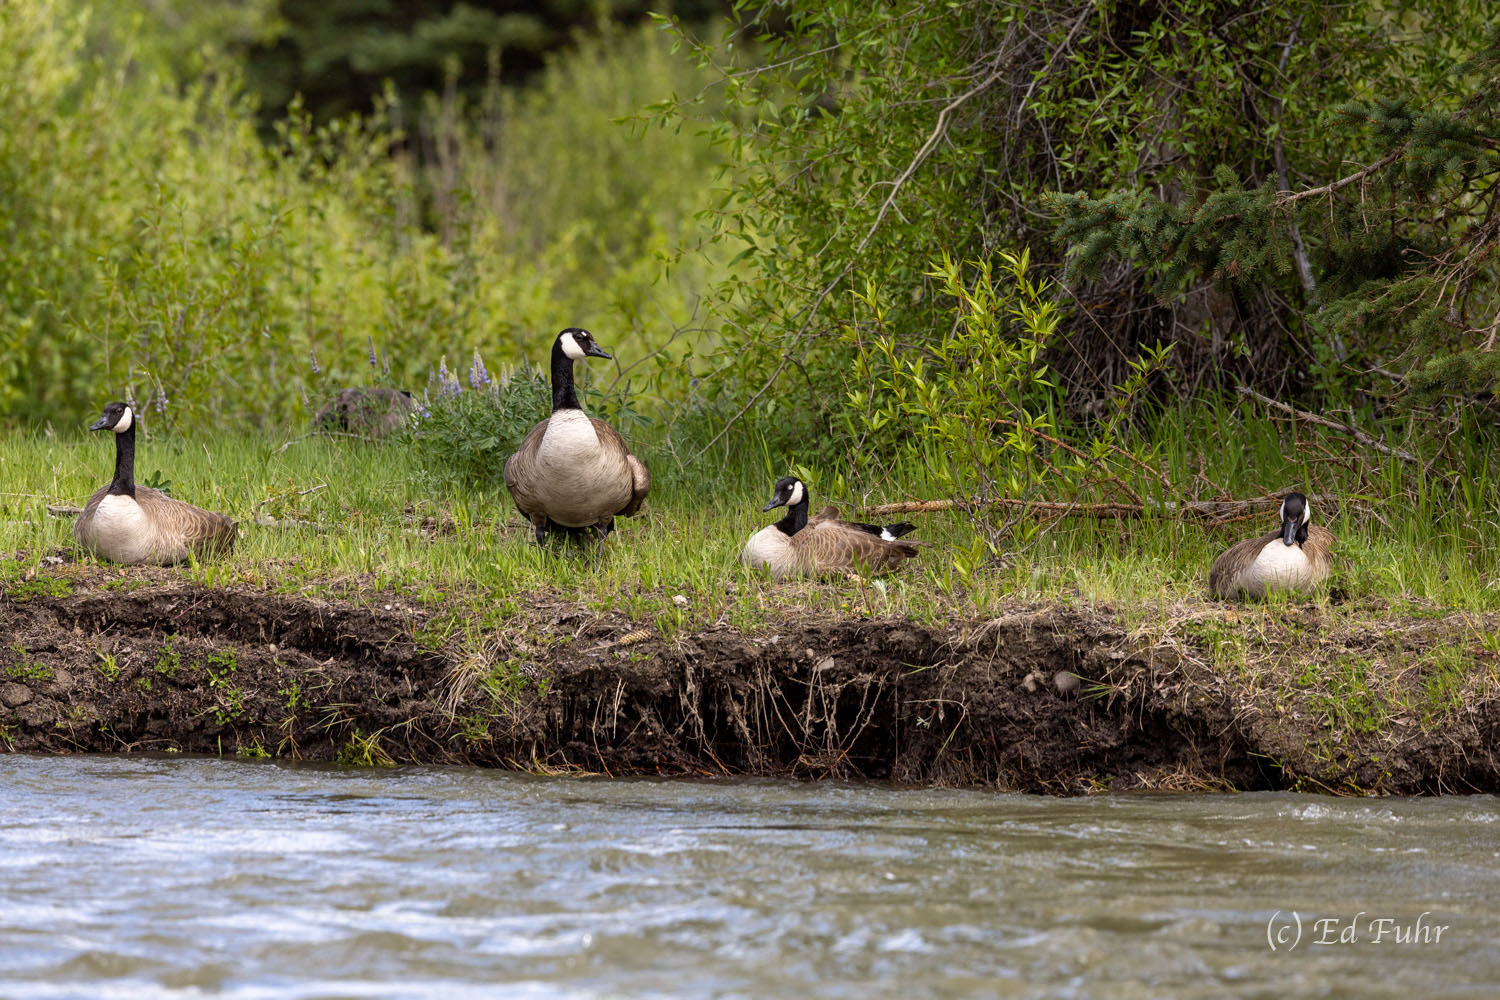 Canadian Geese rest along the banks of the Snake River.